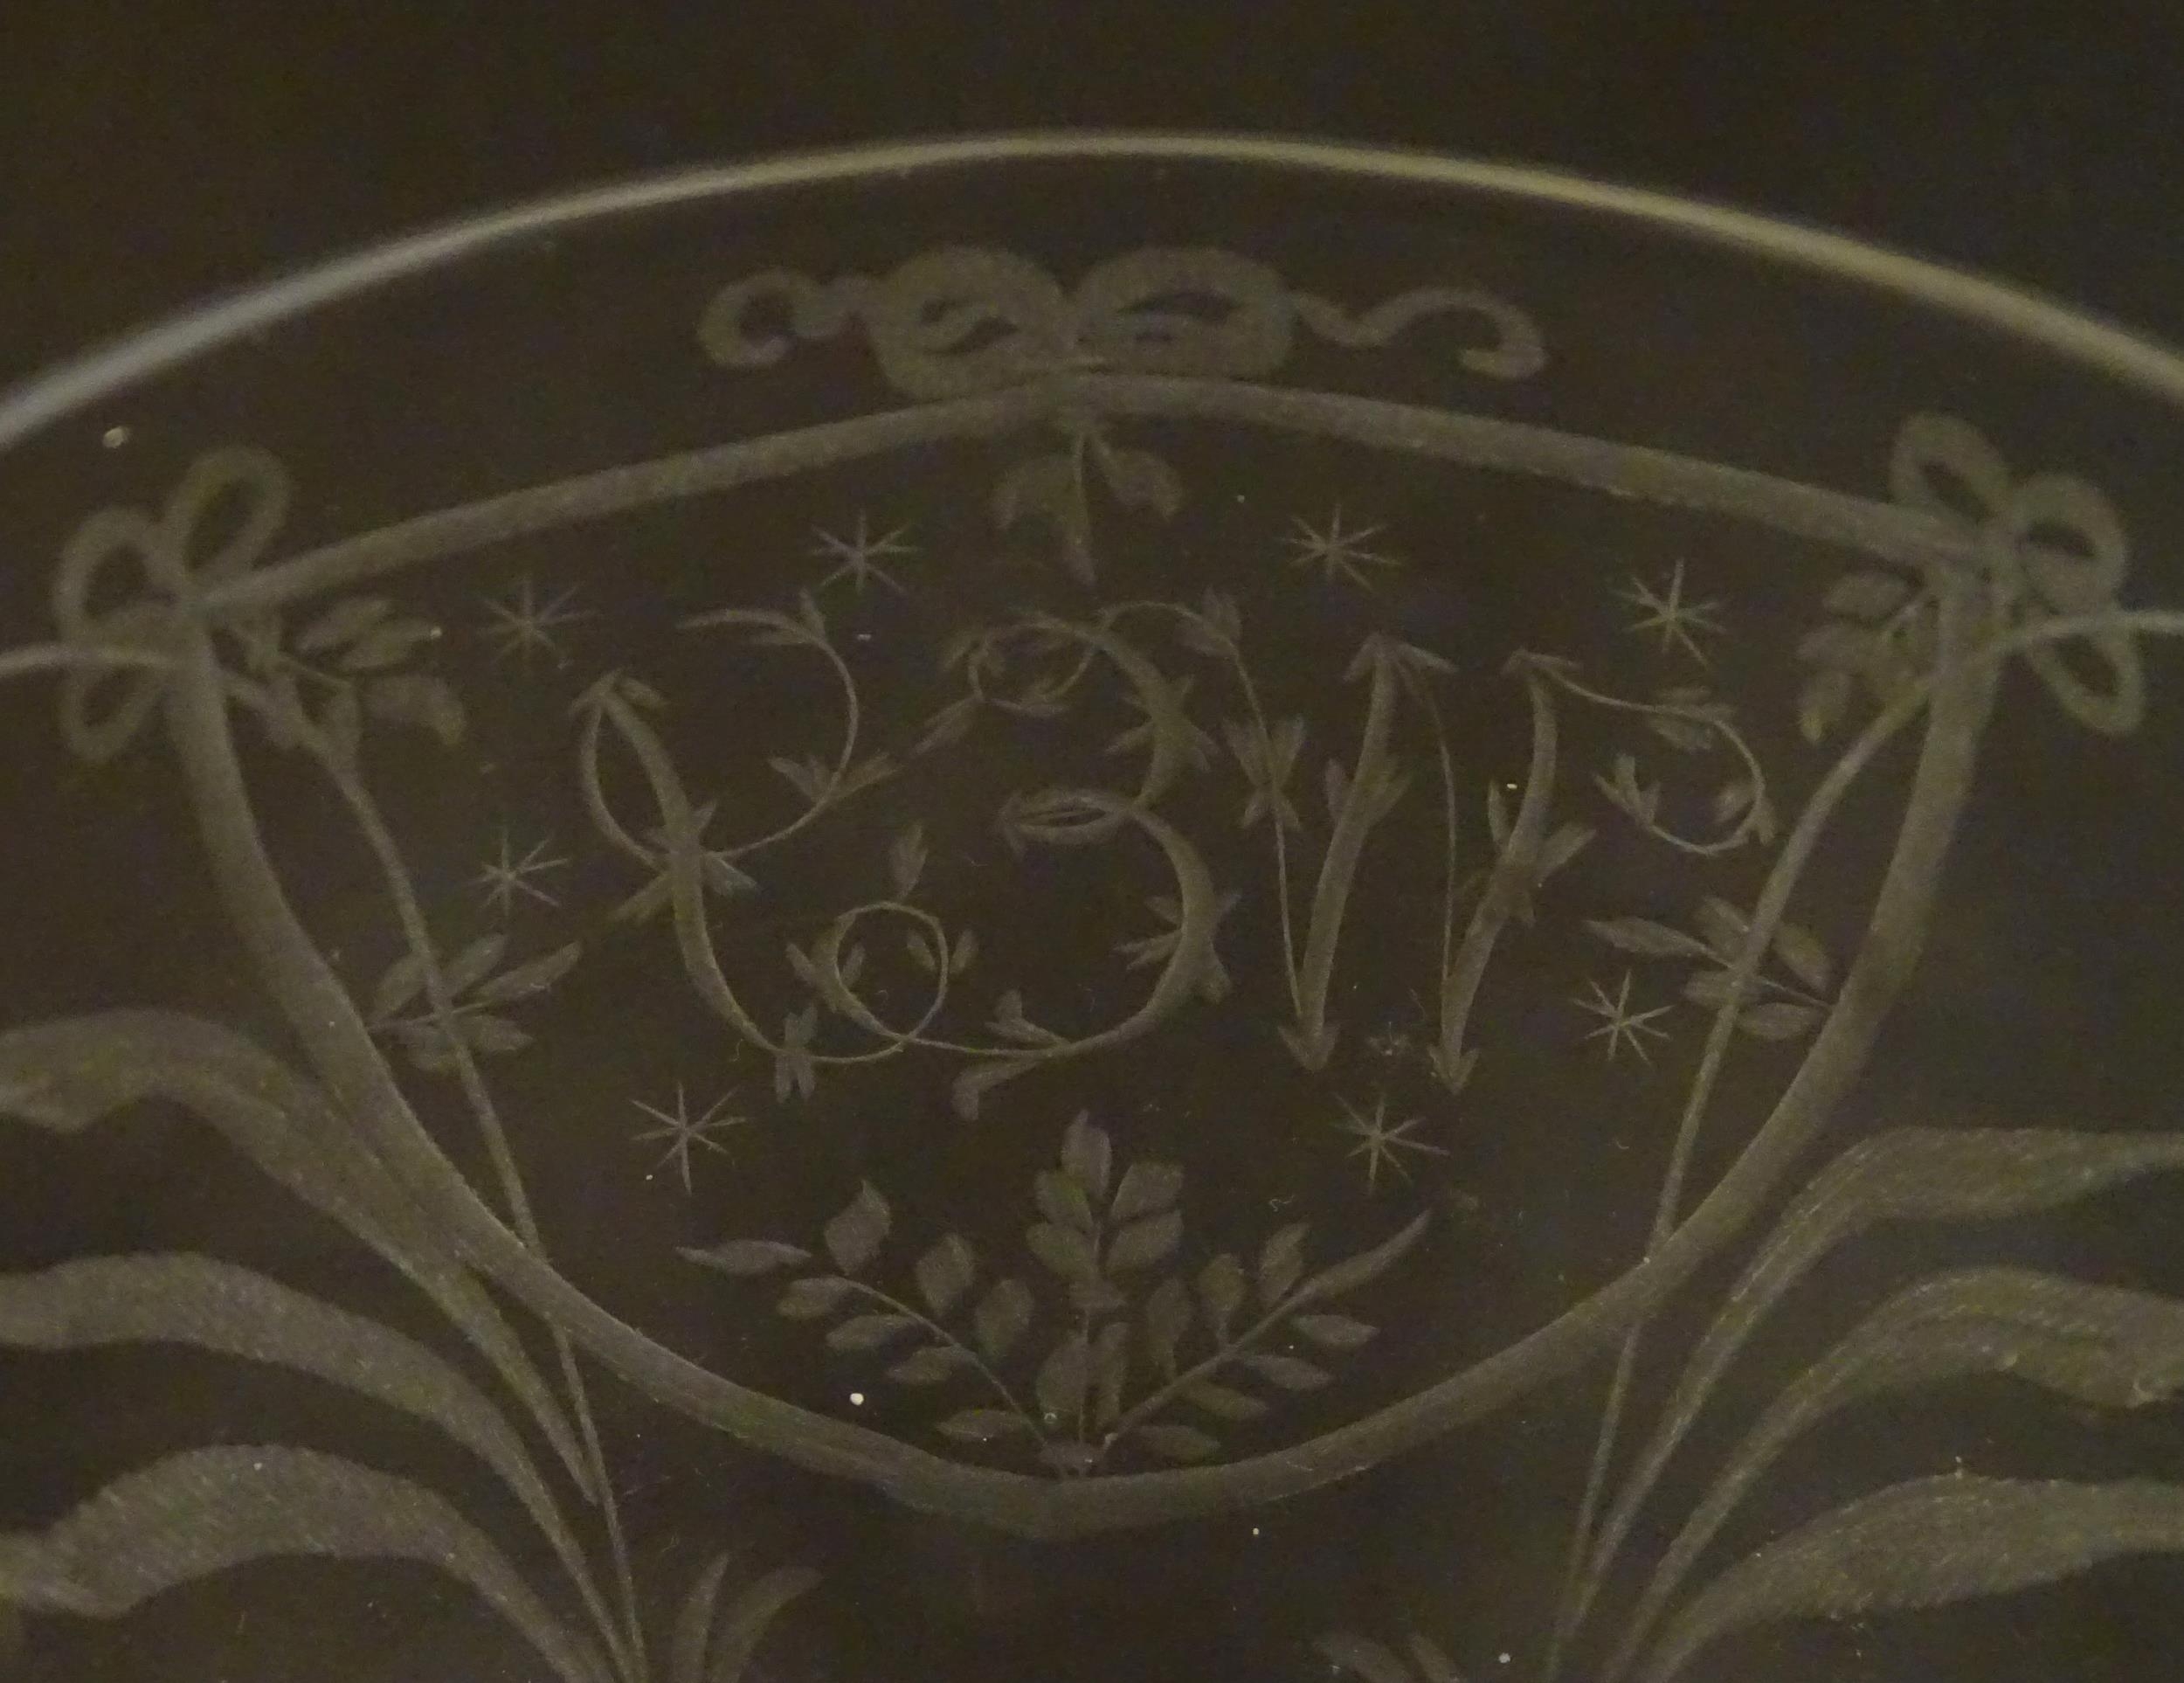 A 19thC glass rummer with engraved decoration depicting windmill and barley detail, with monogram - Image 4 of 9